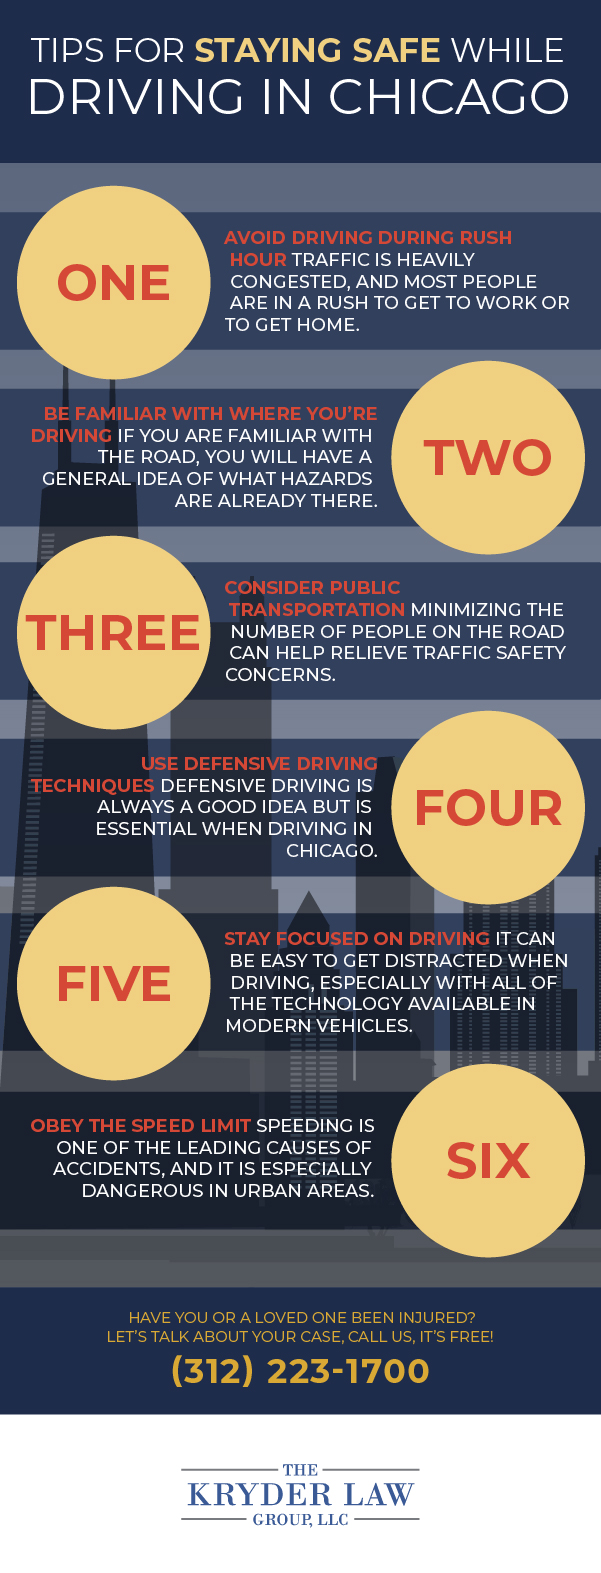 Tips for Staying Safe while Driving in Chicago Infographic